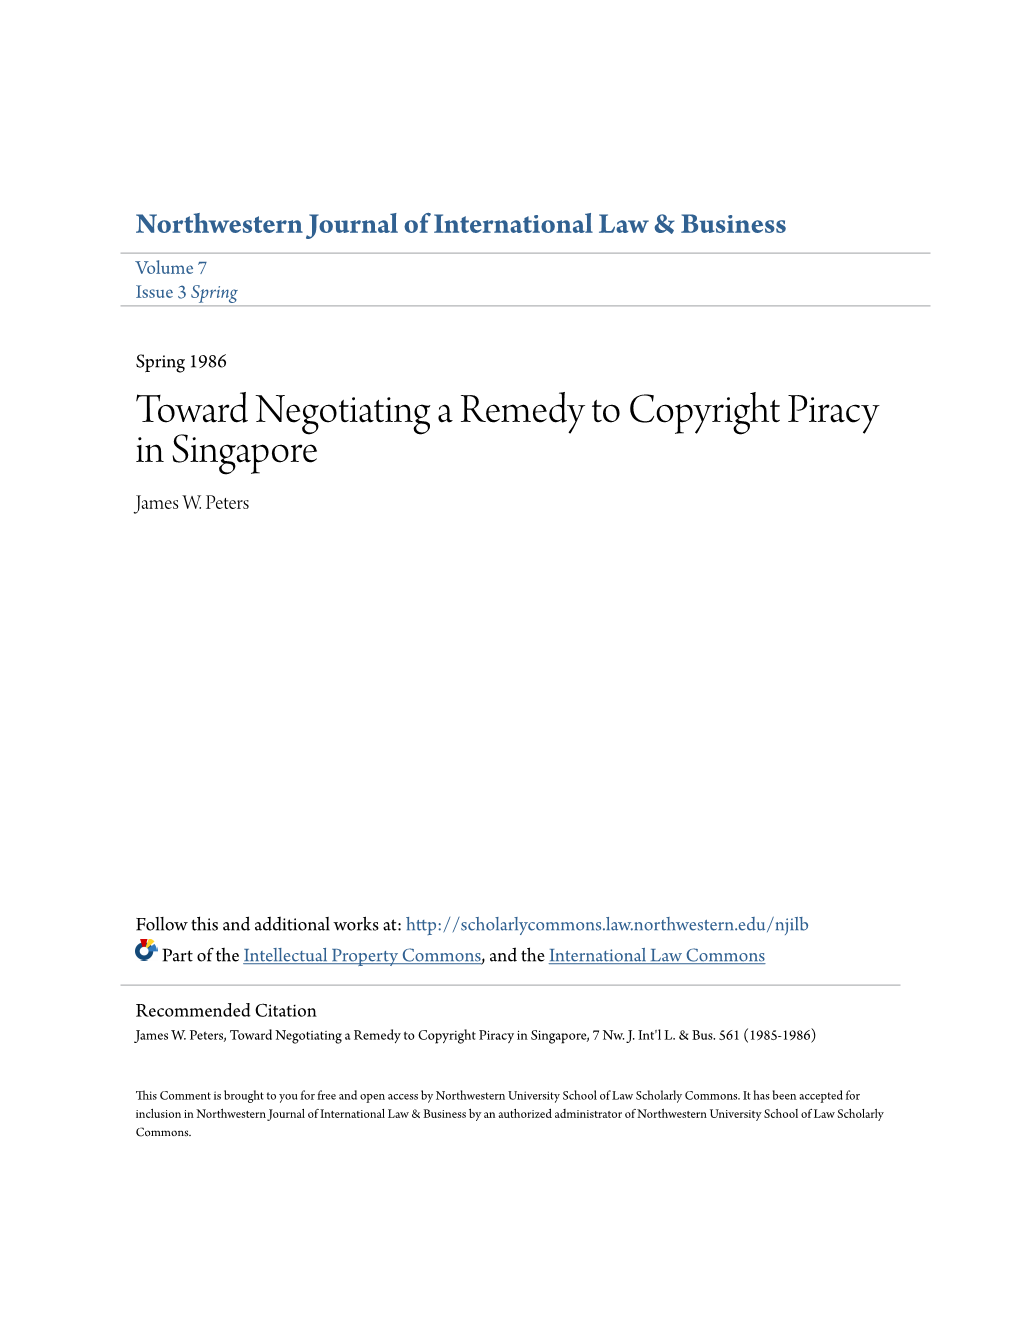 Toward Negotiating a Remedy to Copyright Piracy in Singapore James W